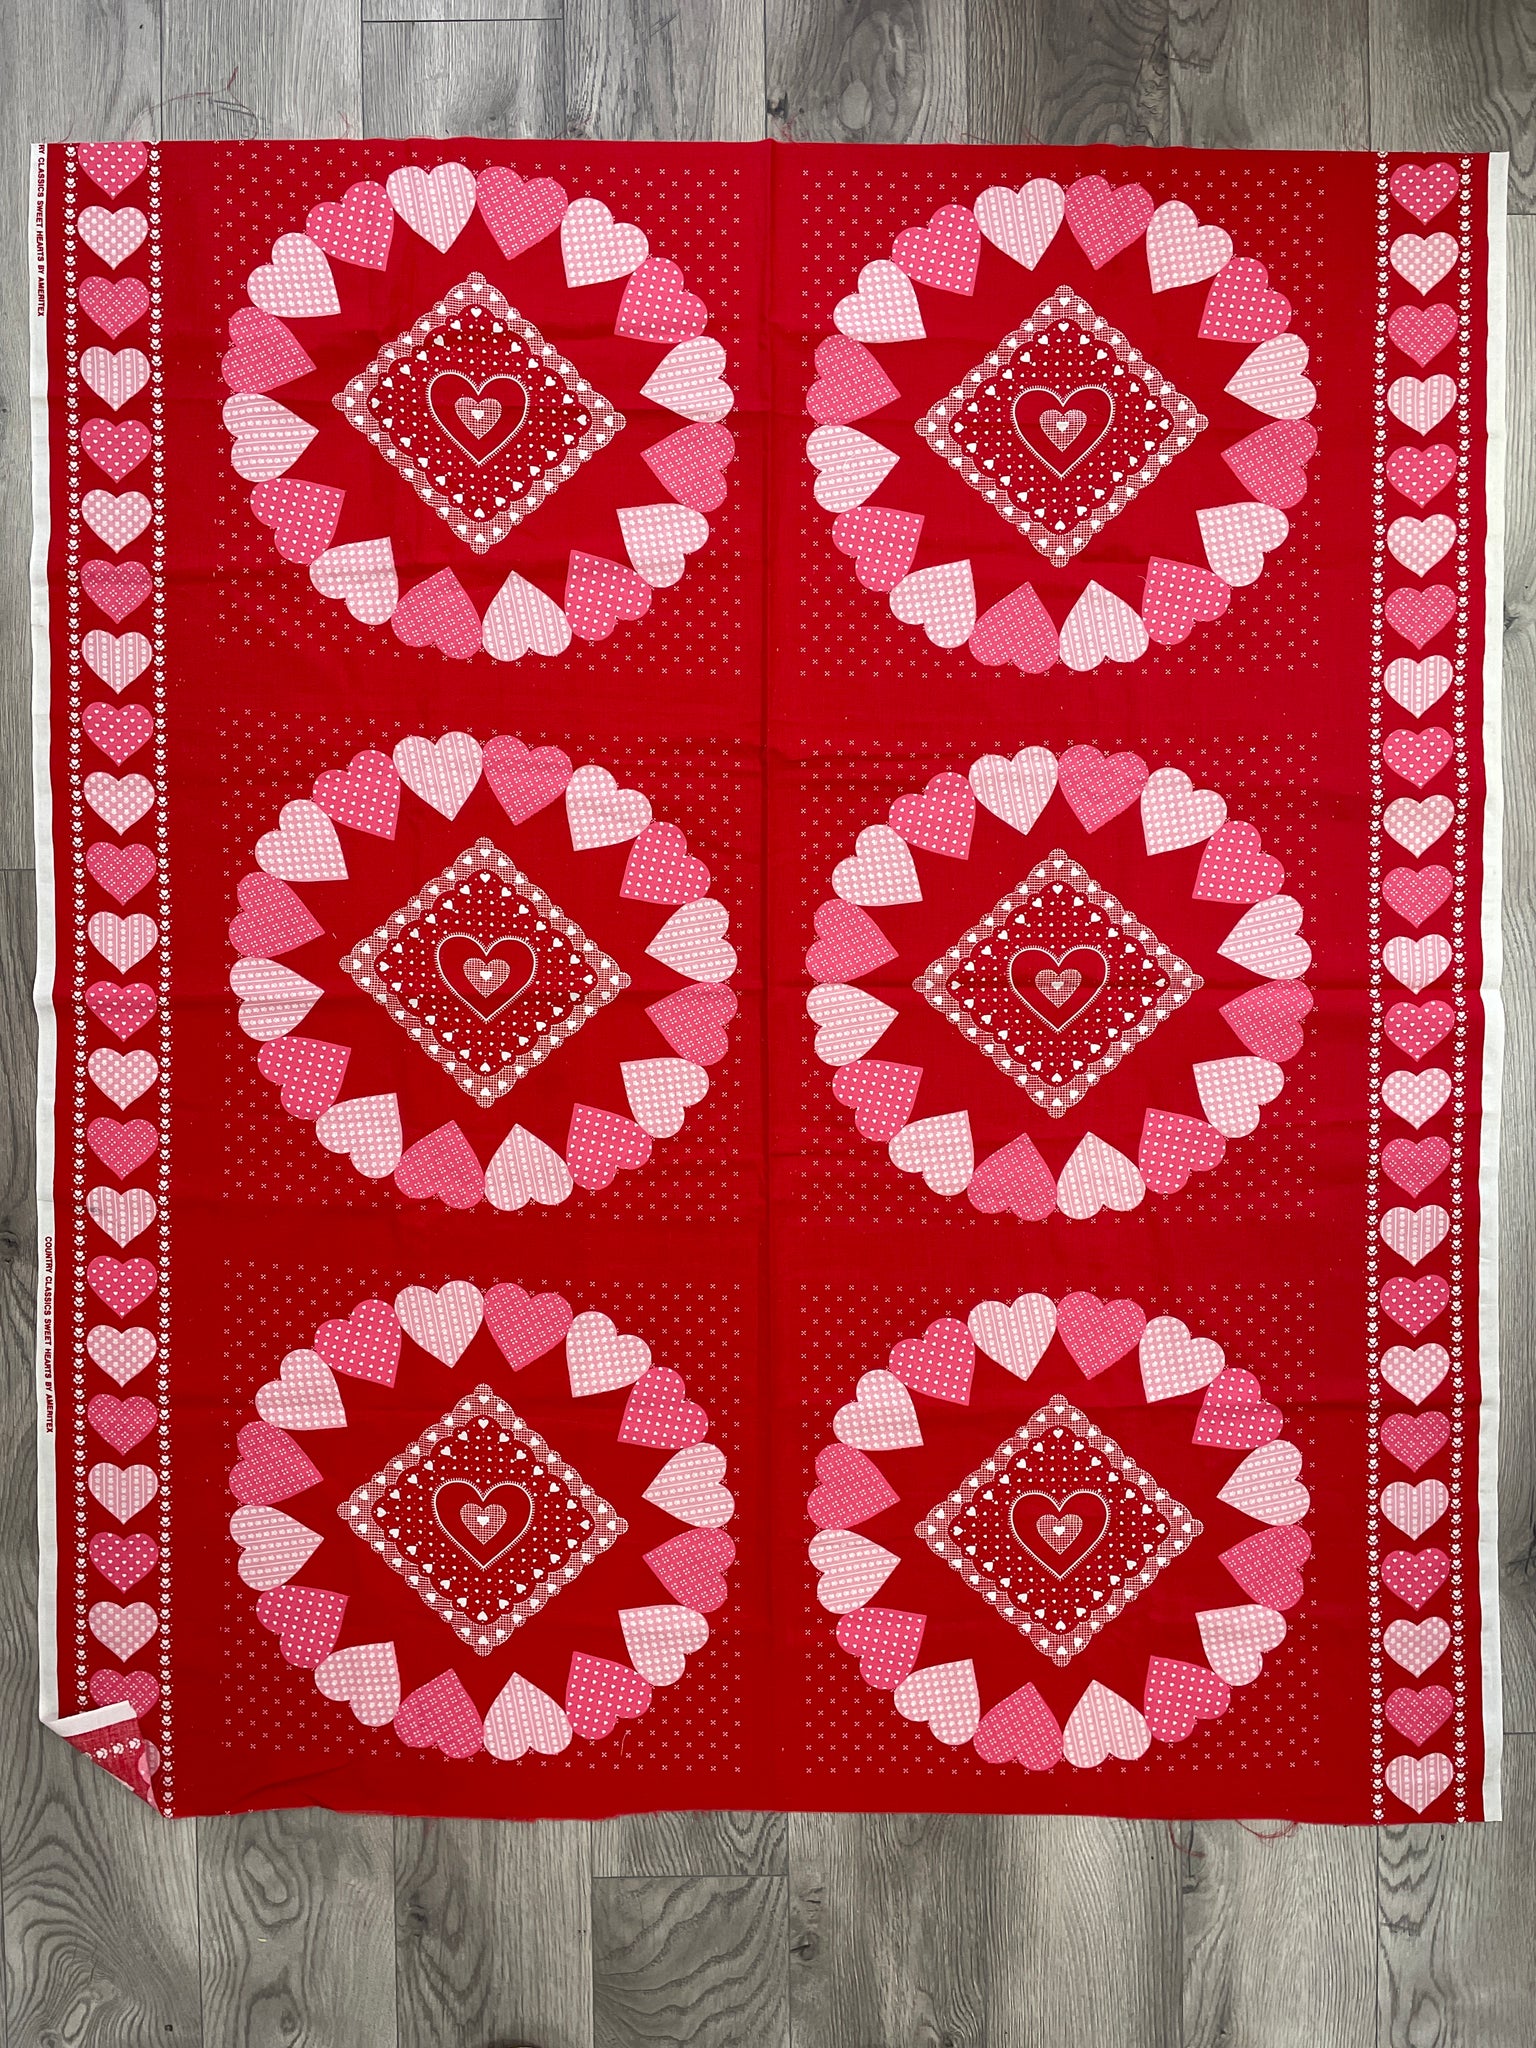 1 3/8 YD Quilting Cotton Panel - Red and Pinks Calico Hearts